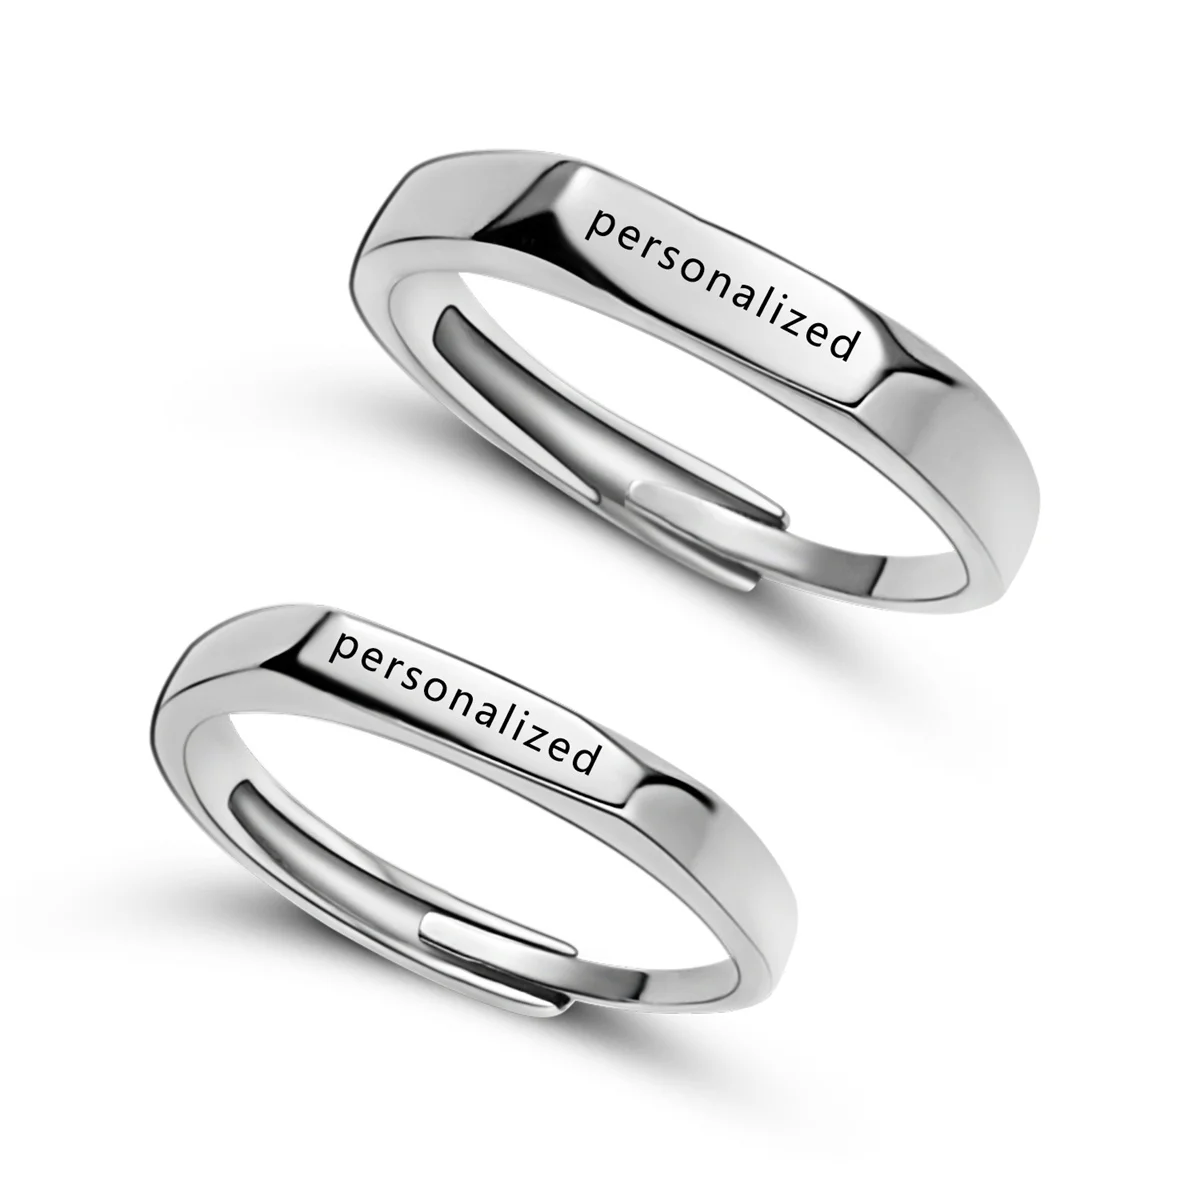 Personalized Custom Name Text Couple Rings For Women Men Stainless Steel Engraved Date Opening Ring Anniversary Gifts Jewelry basic wedding bands rings for women man custom engrave name date love info promise alliance anniversary valentine s day gift